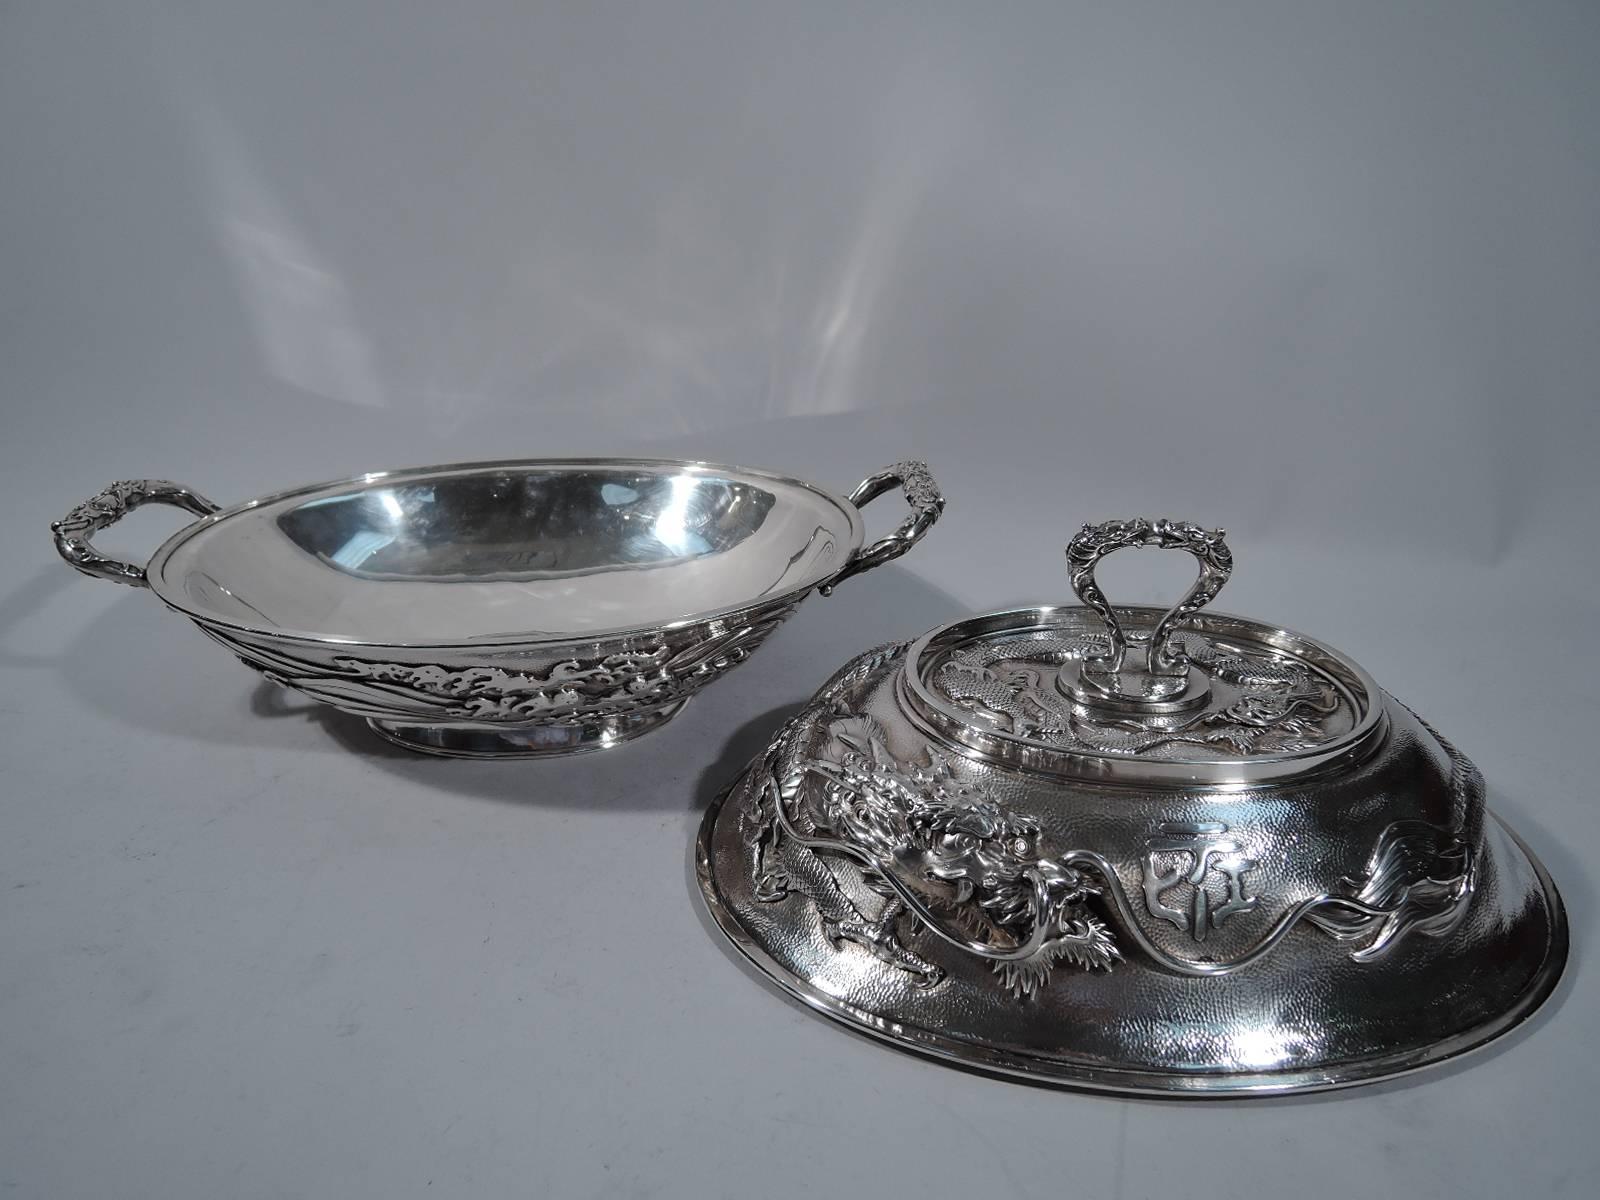 Large sterling silver tureen. Retailed by Arthur & Bond in Yokohama, circa 1900. Ovoid bowl with bracket end handles and spread oval foot. Domed cover with slip-lock bracket finial. Fine all-over honeycomb hand-hammering. Bowl has applied wraparound